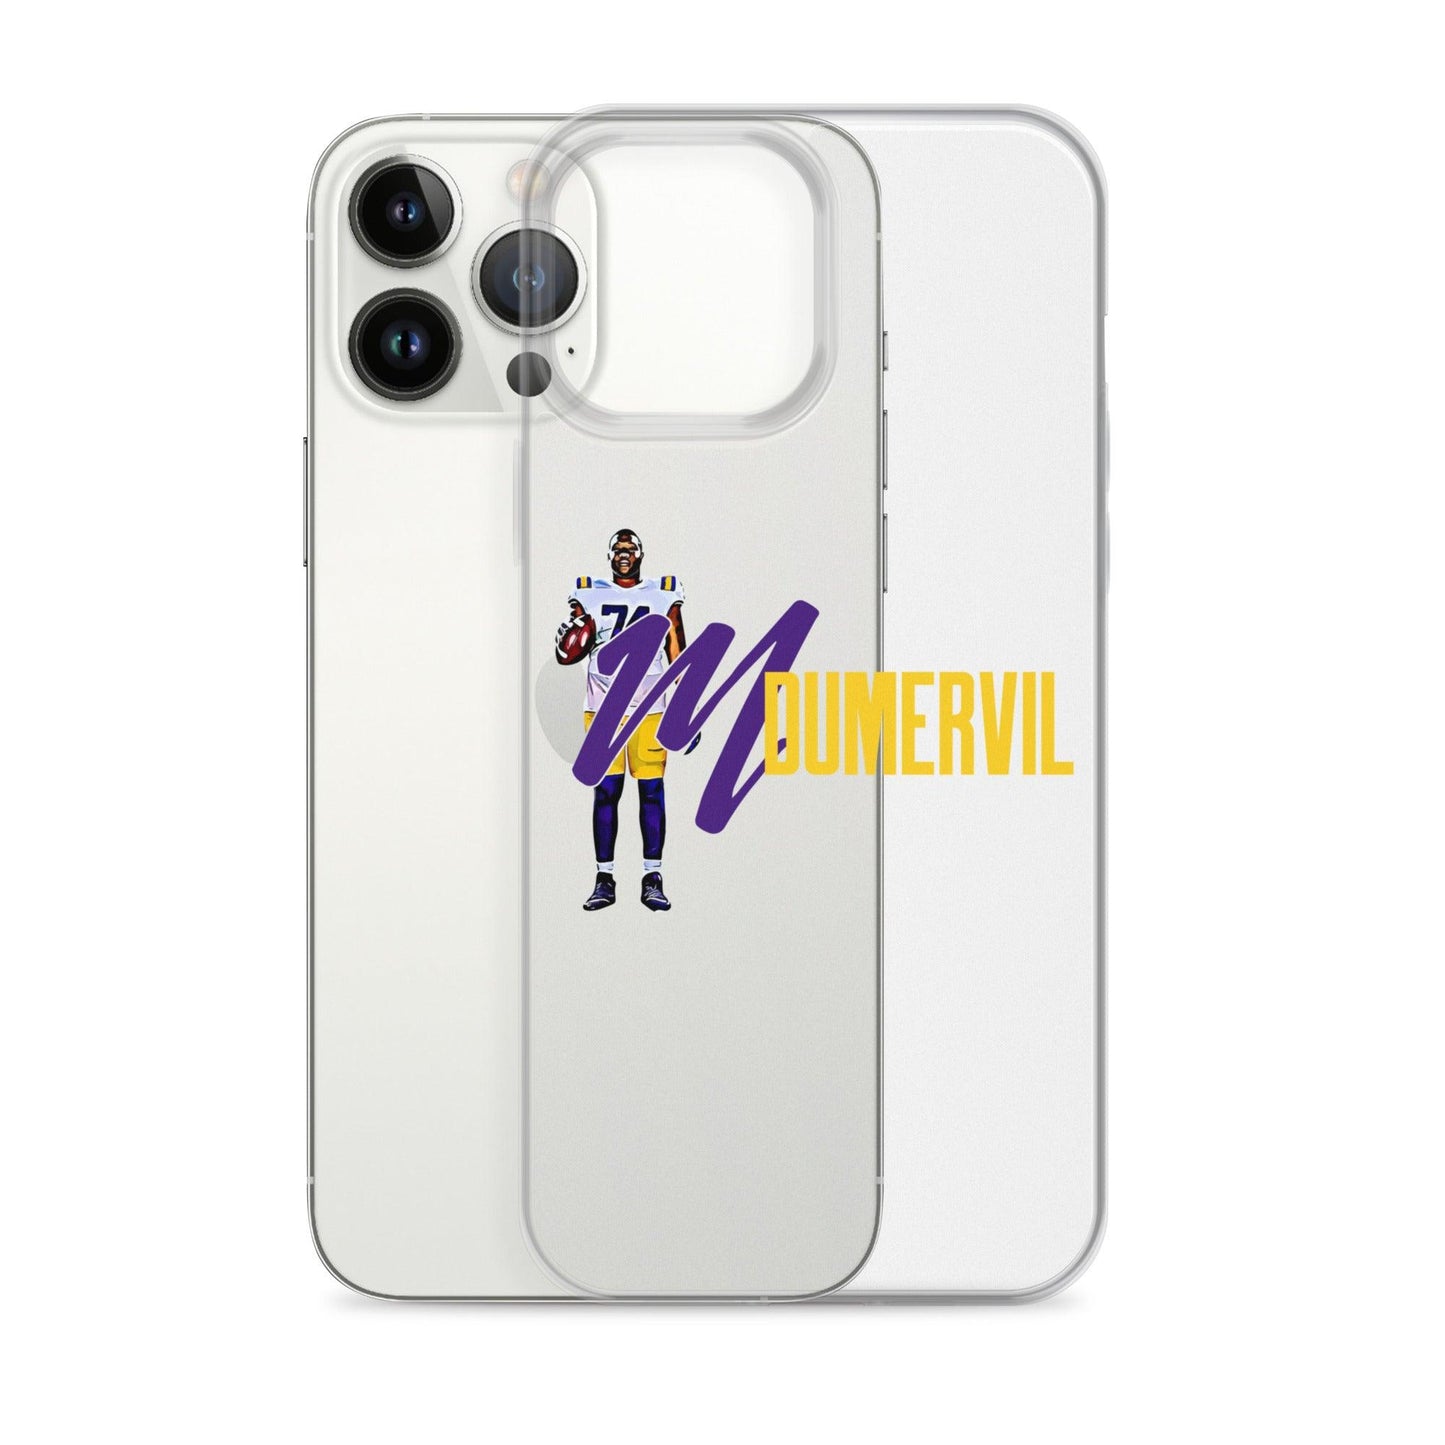 Marcus Dumervil "Stand Strong" iPhone Case - Fan Arch